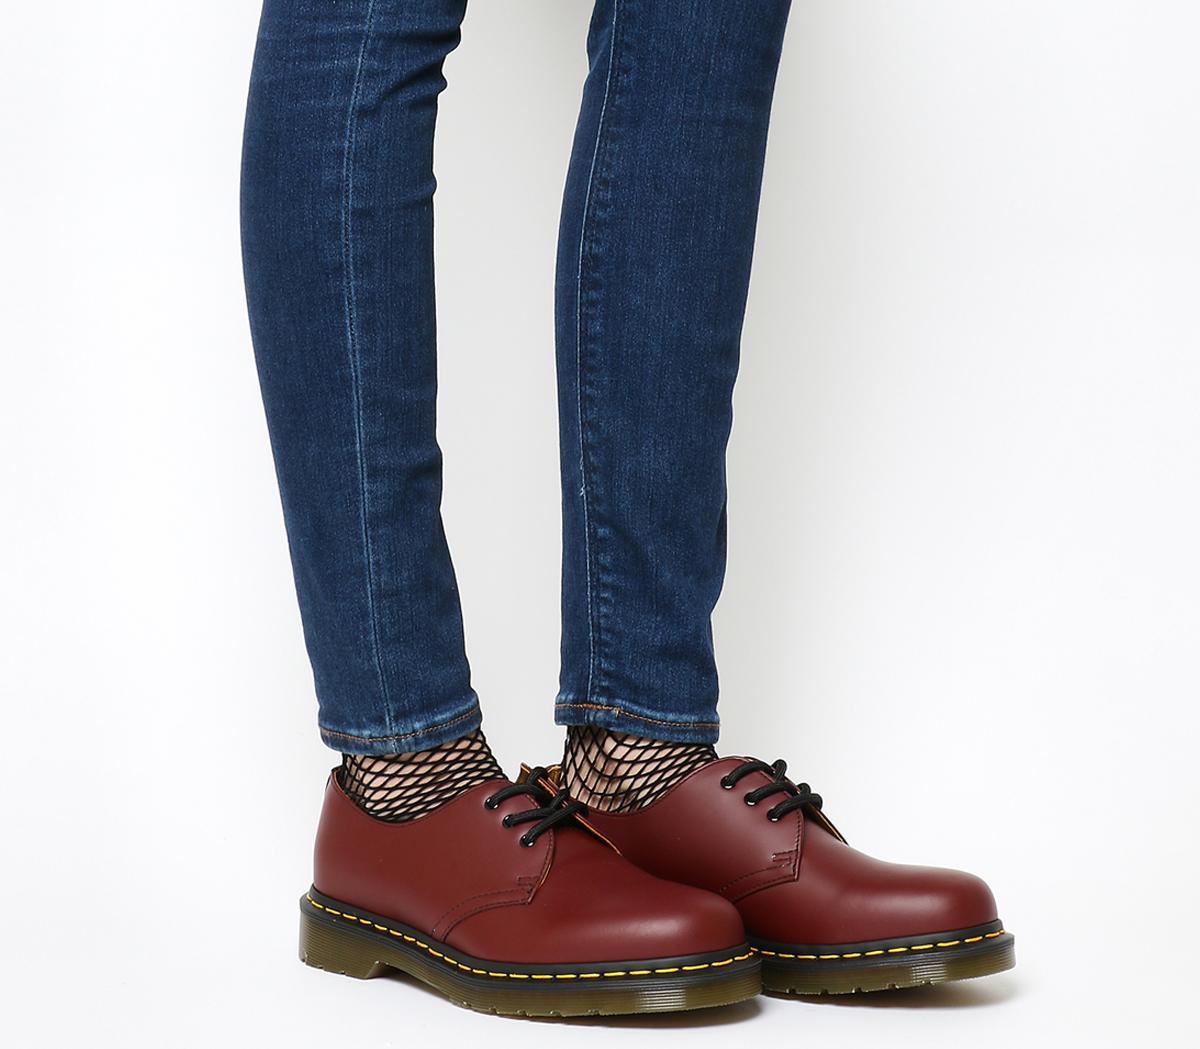 Dr. Martens 3 Eyelet Shoes Cherry Red - Flat Shoes for Women